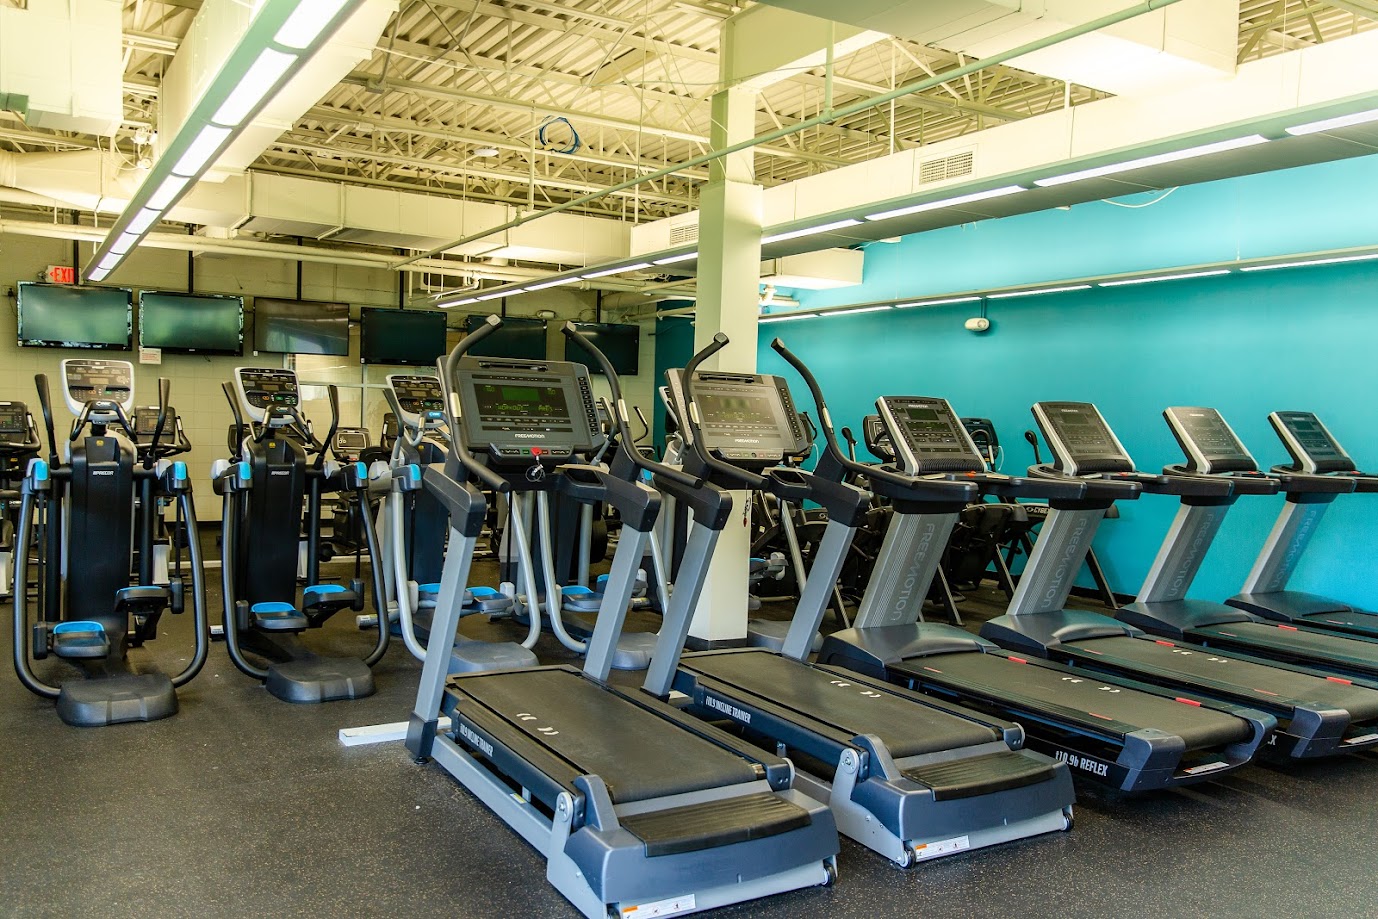 Southwest_Treadmills and Ellipital machines with tv screens in the background